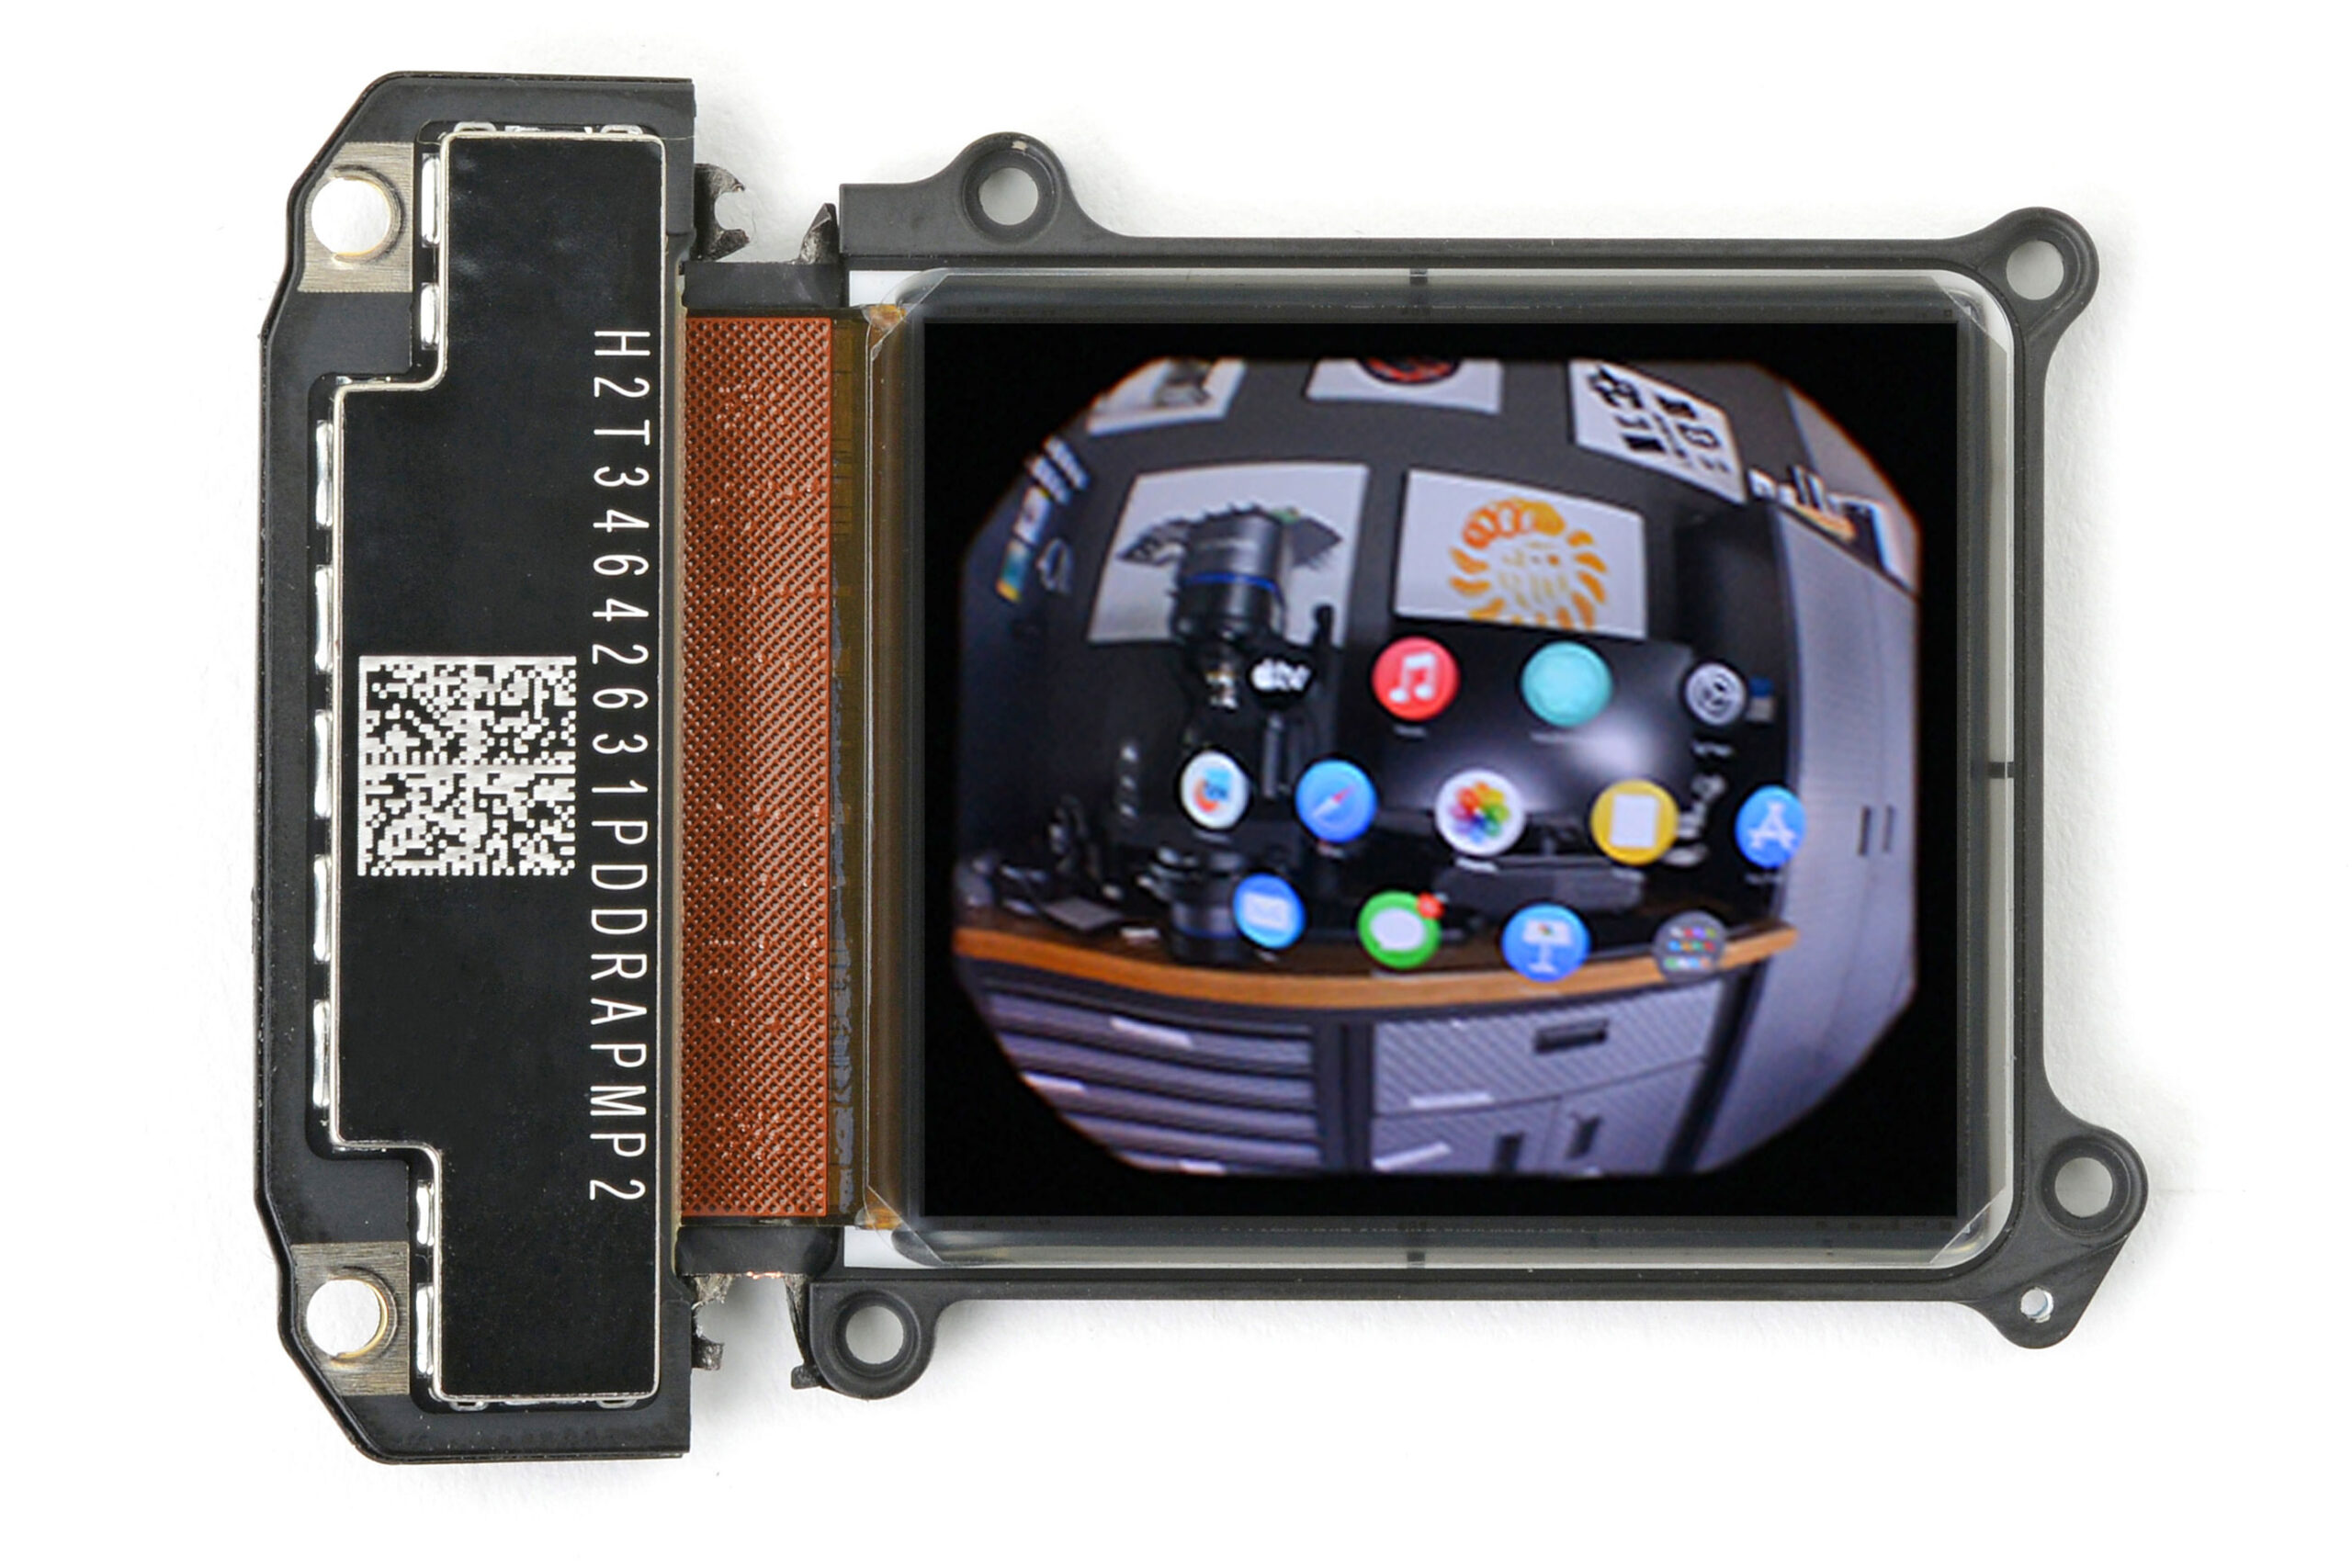 Vision Pro Teardown Part 2: What’s the Display Resolution?